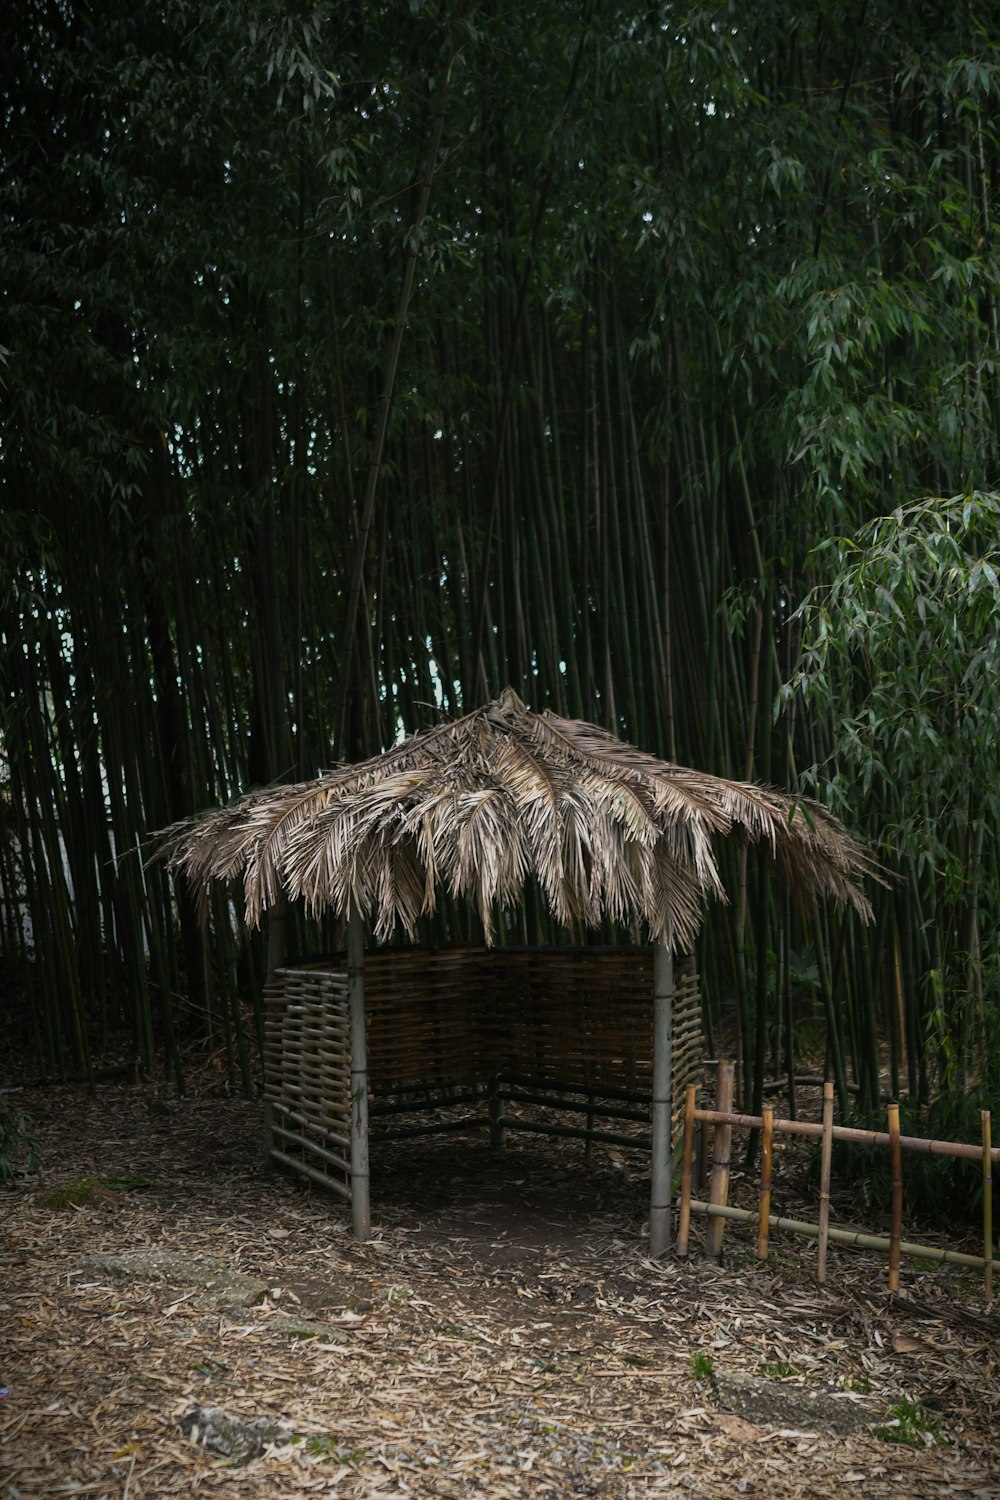 a hut with a thatched roof in a bamboo forest